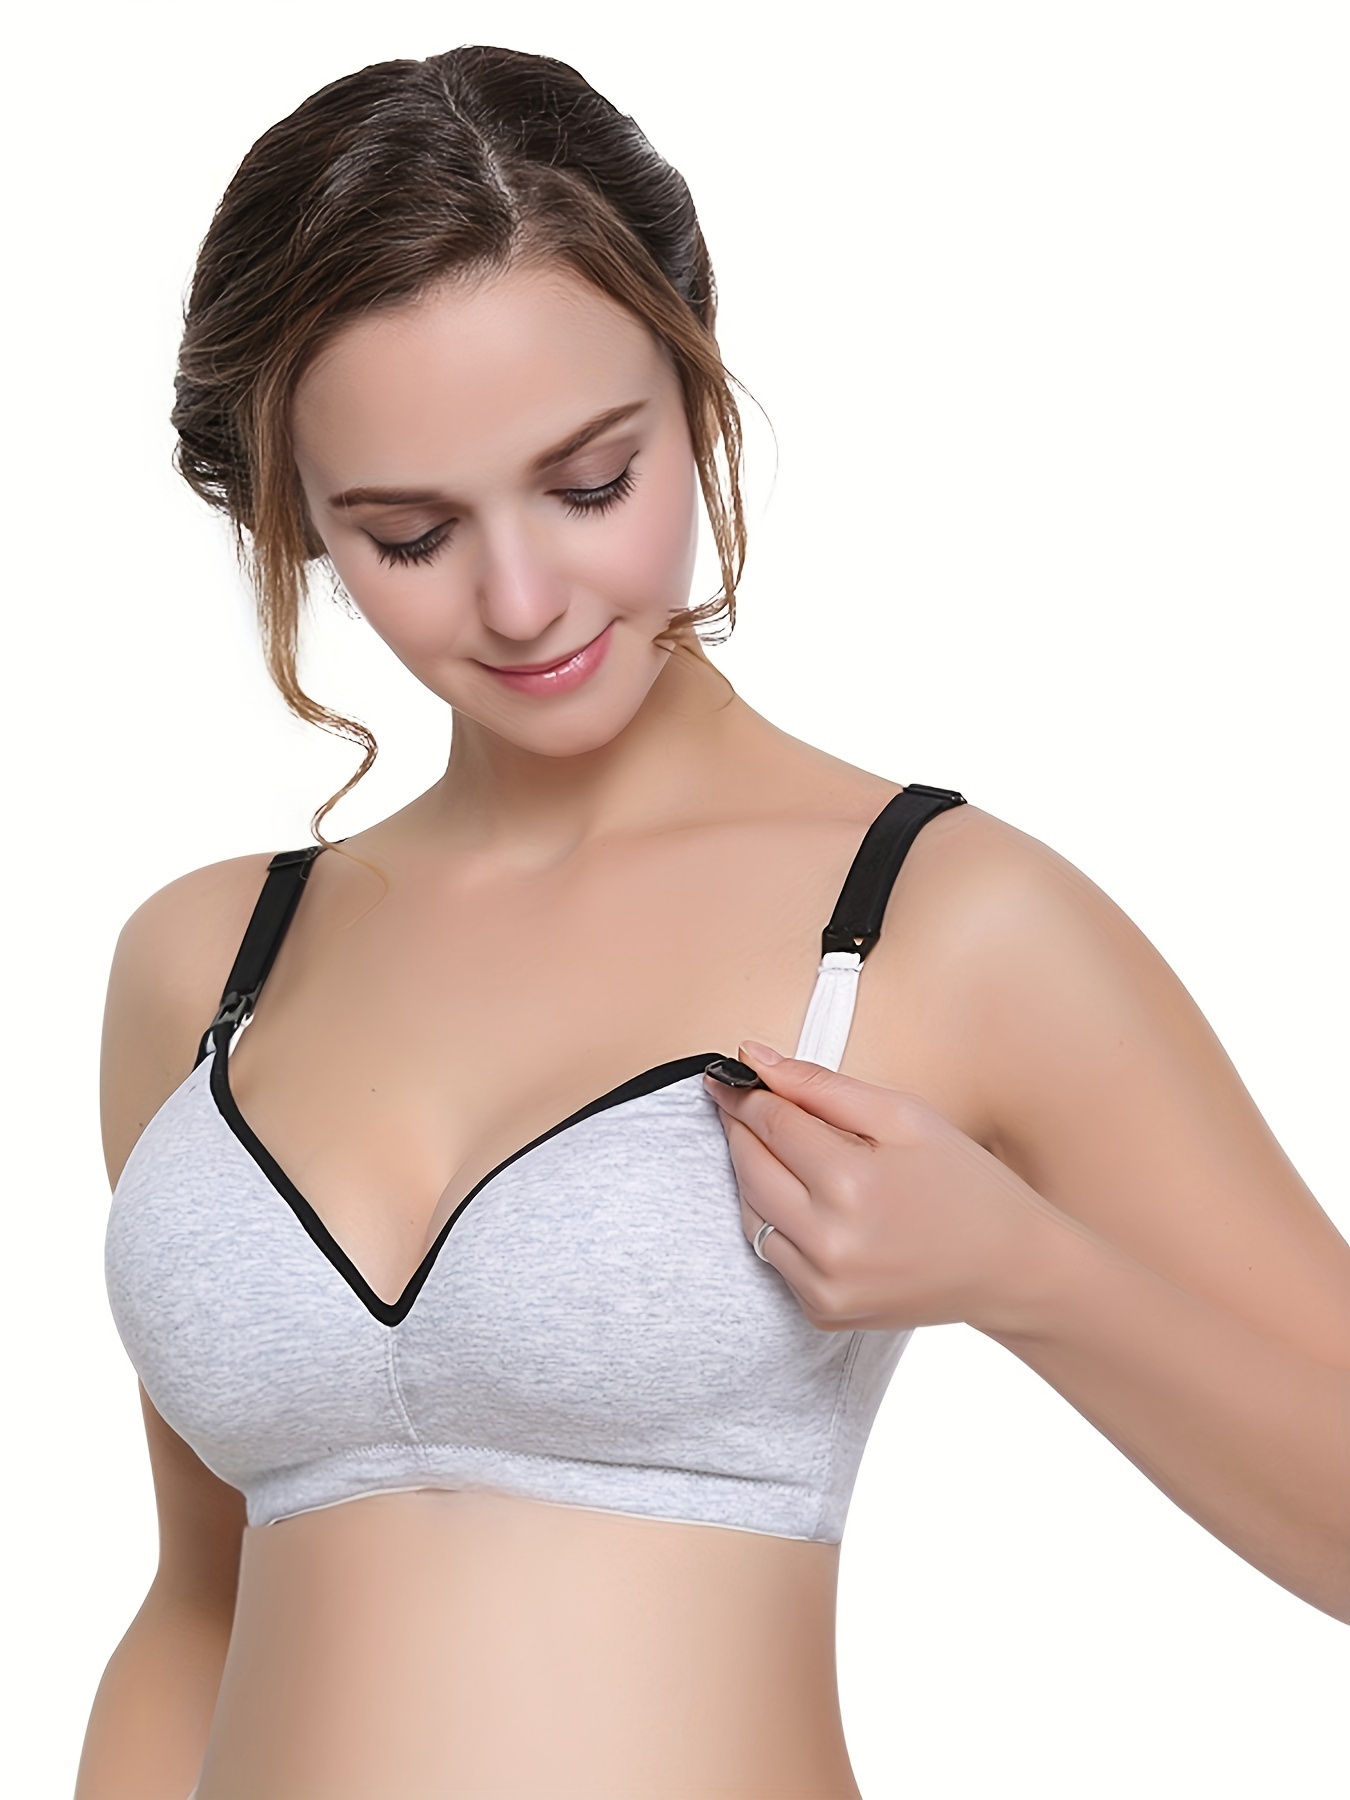 Pregnant Women's Bras, Supportive Comfy Seamless Bra For Daily Comfort,  Open Front Button Maternity Nursing Bra